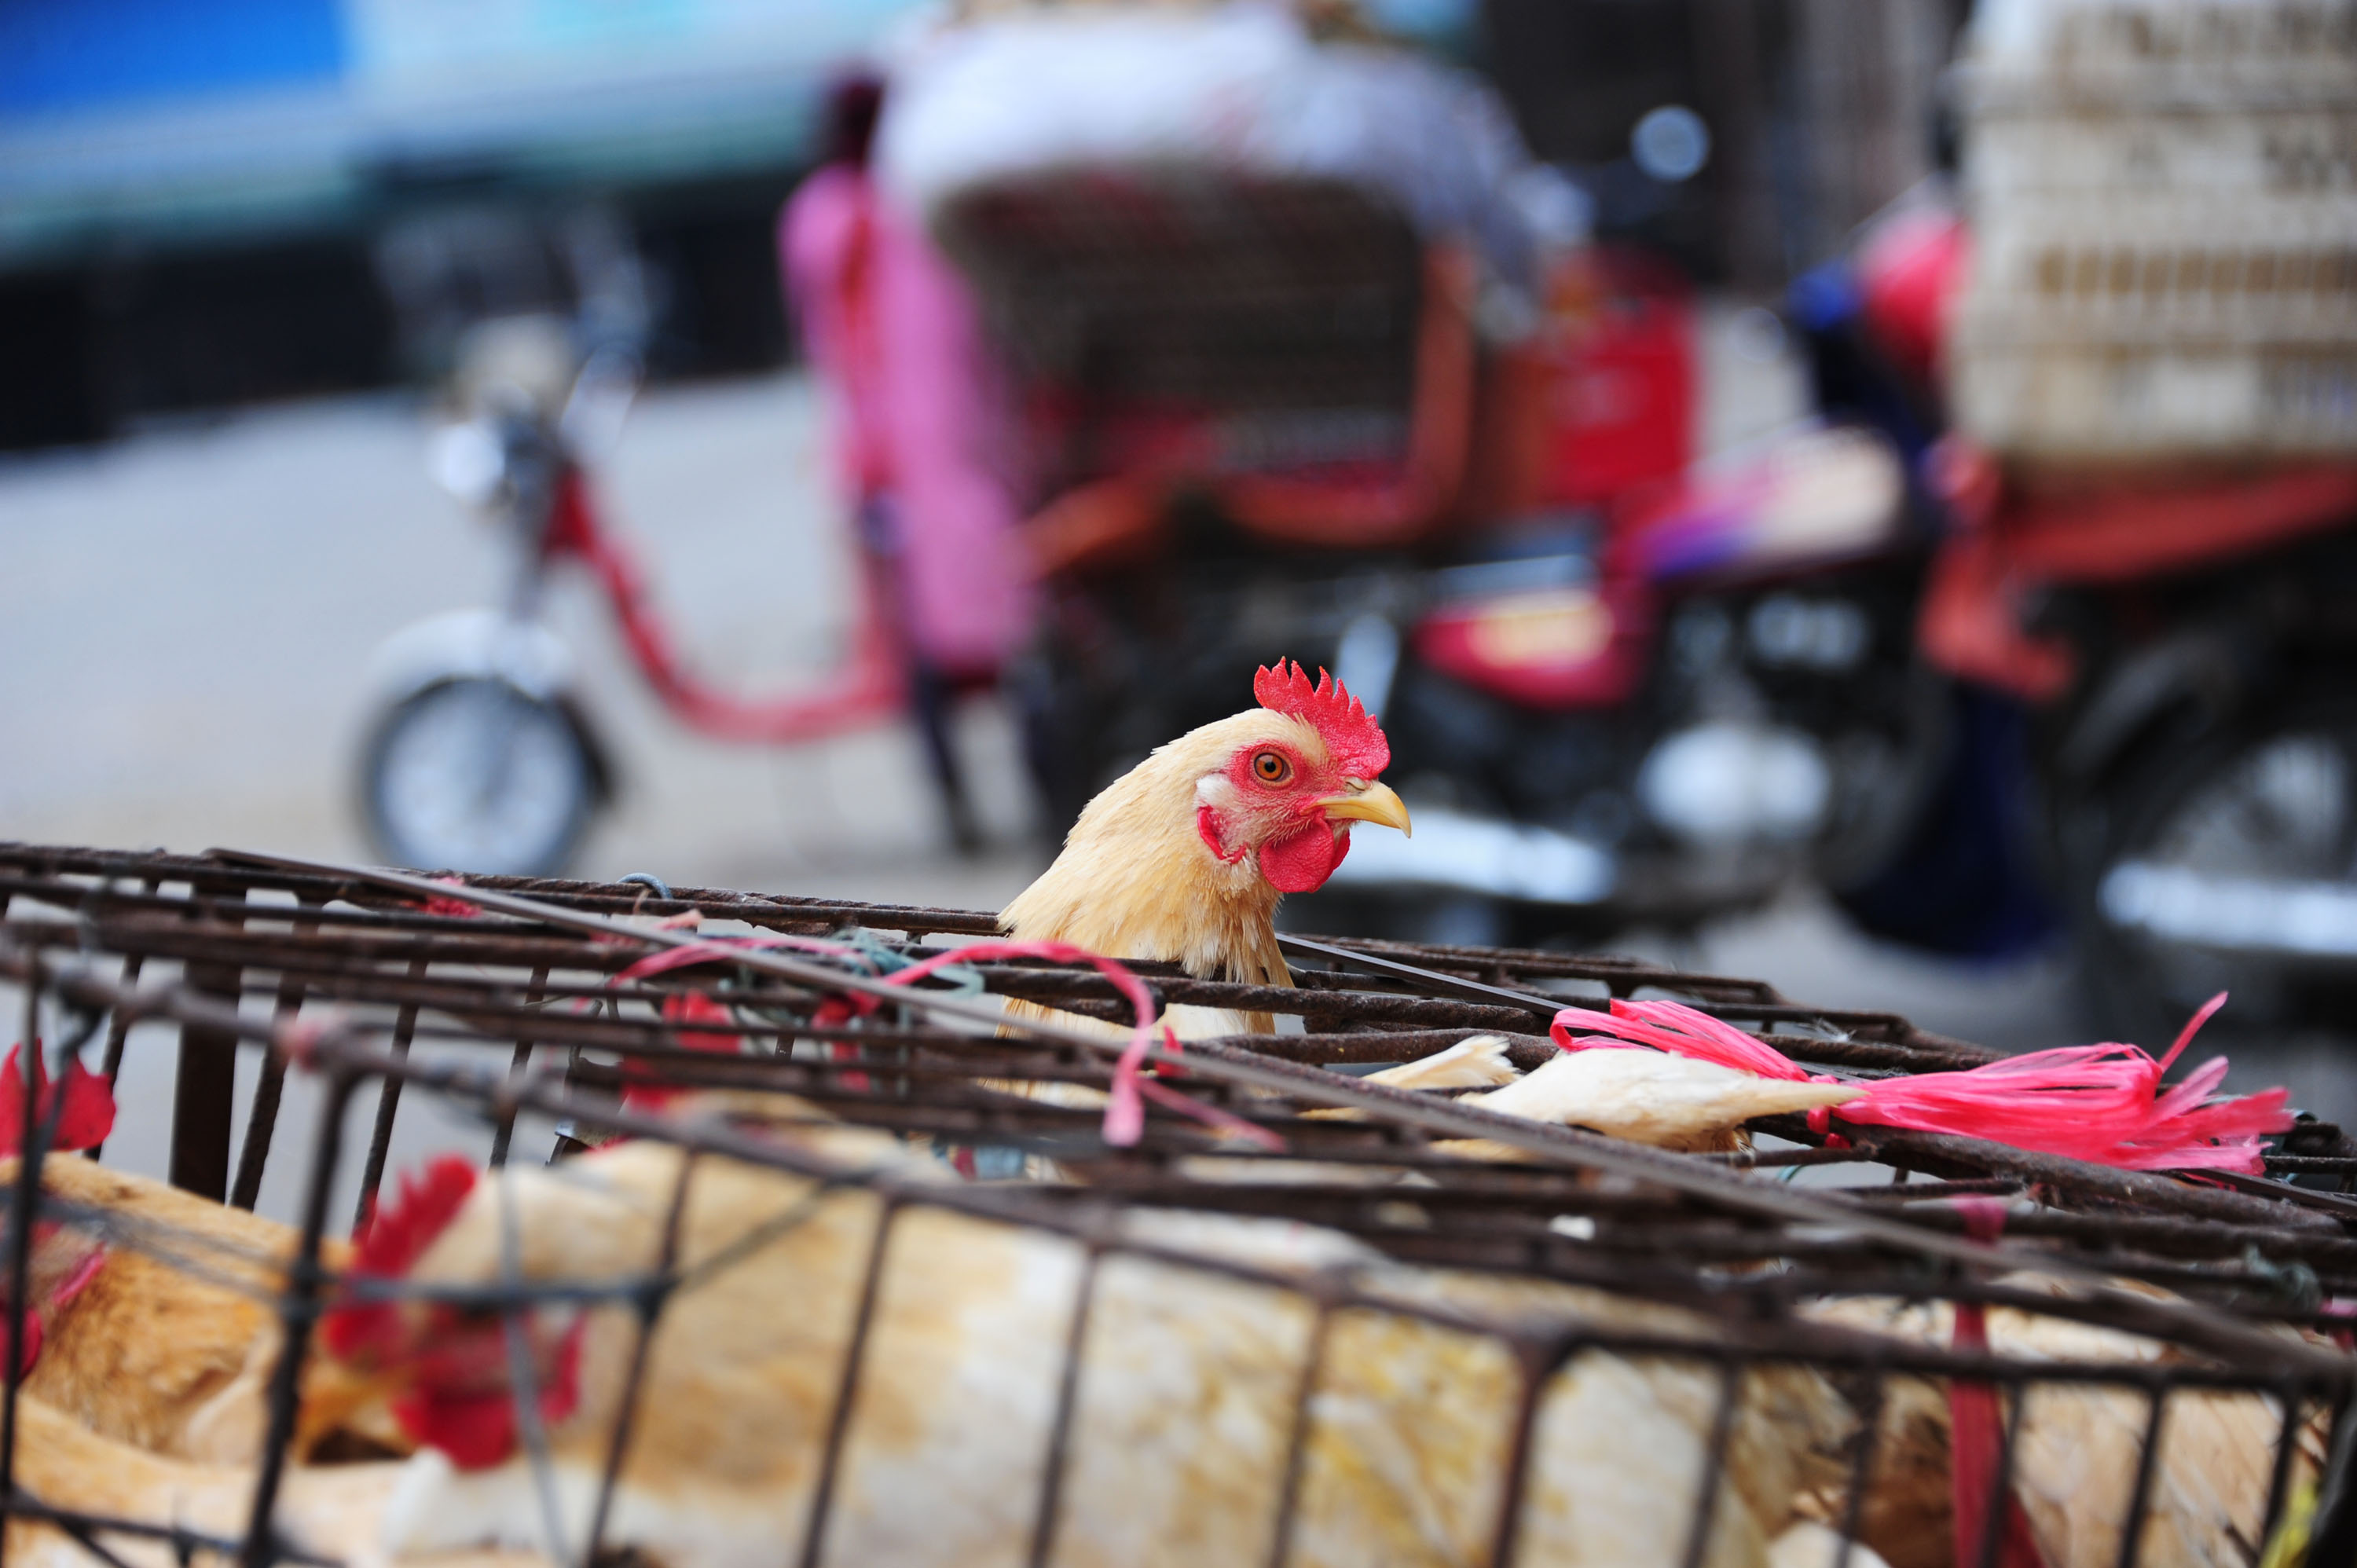 Live chickens for sale in a cage at a free market in Jiangmen city, south China's Guangdong province, on March 1, 2015 (Guan Yurou/Imaginechina—AP)